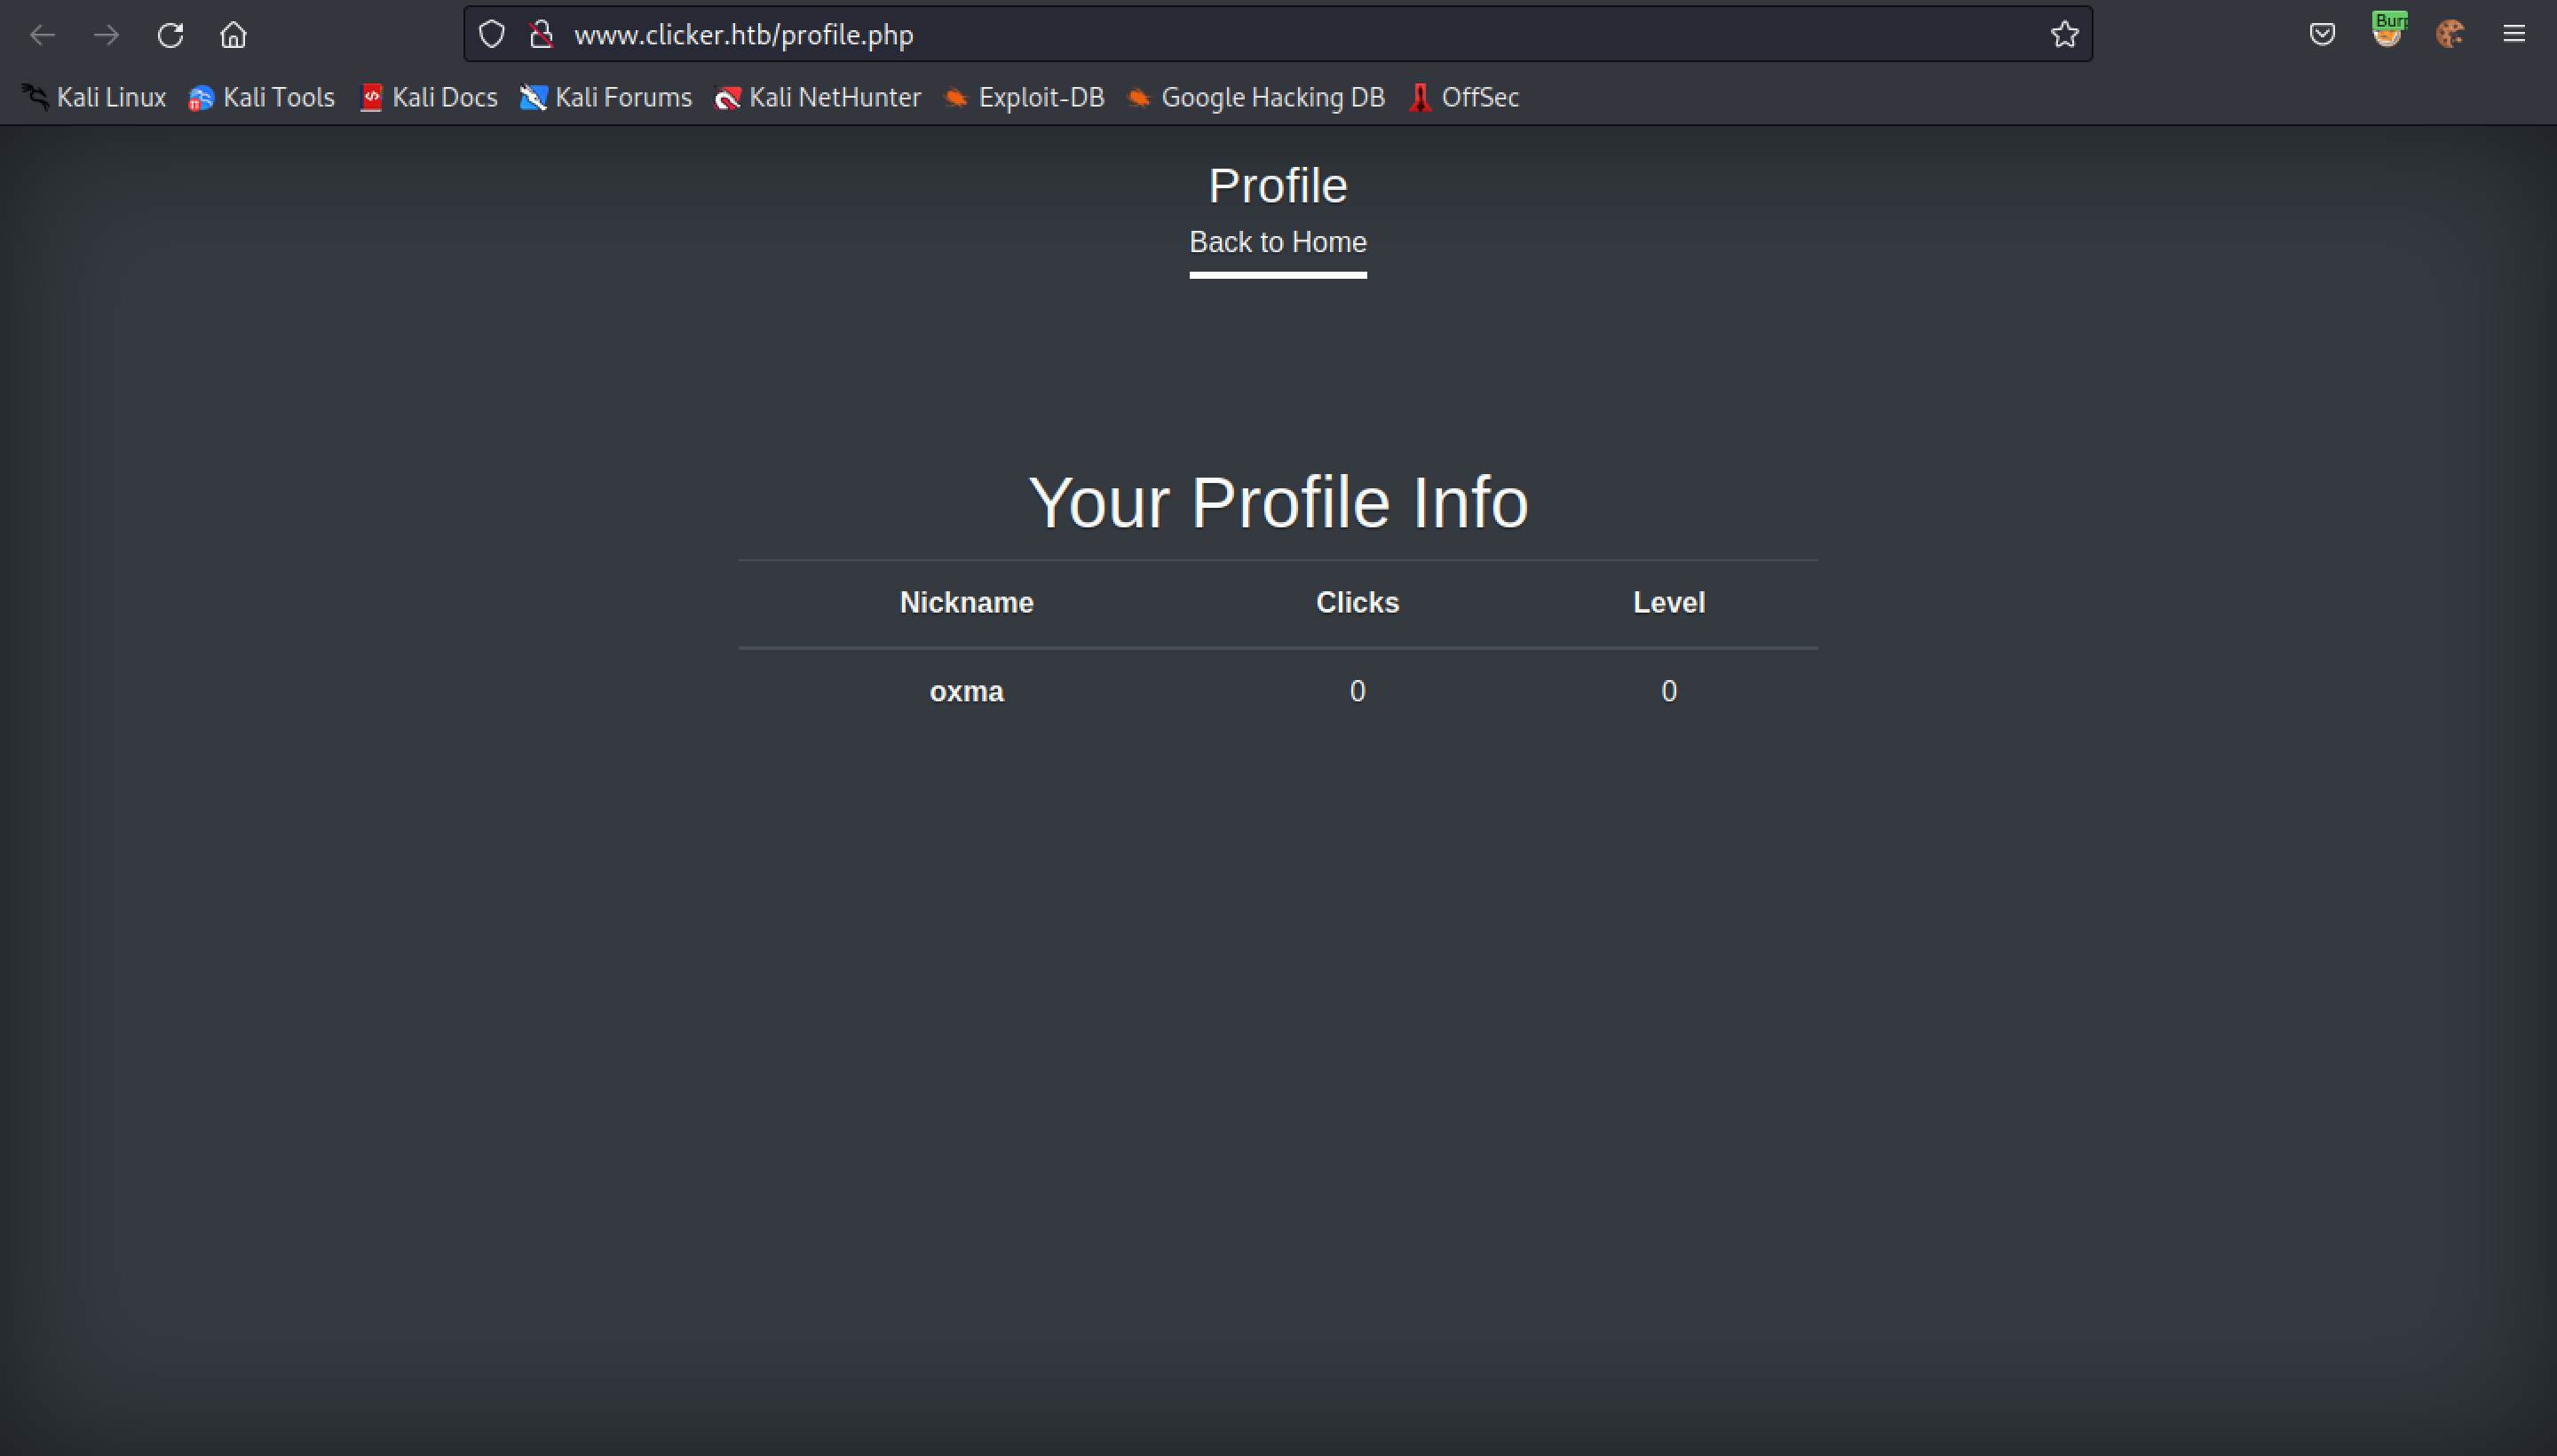 Profile page of the user.